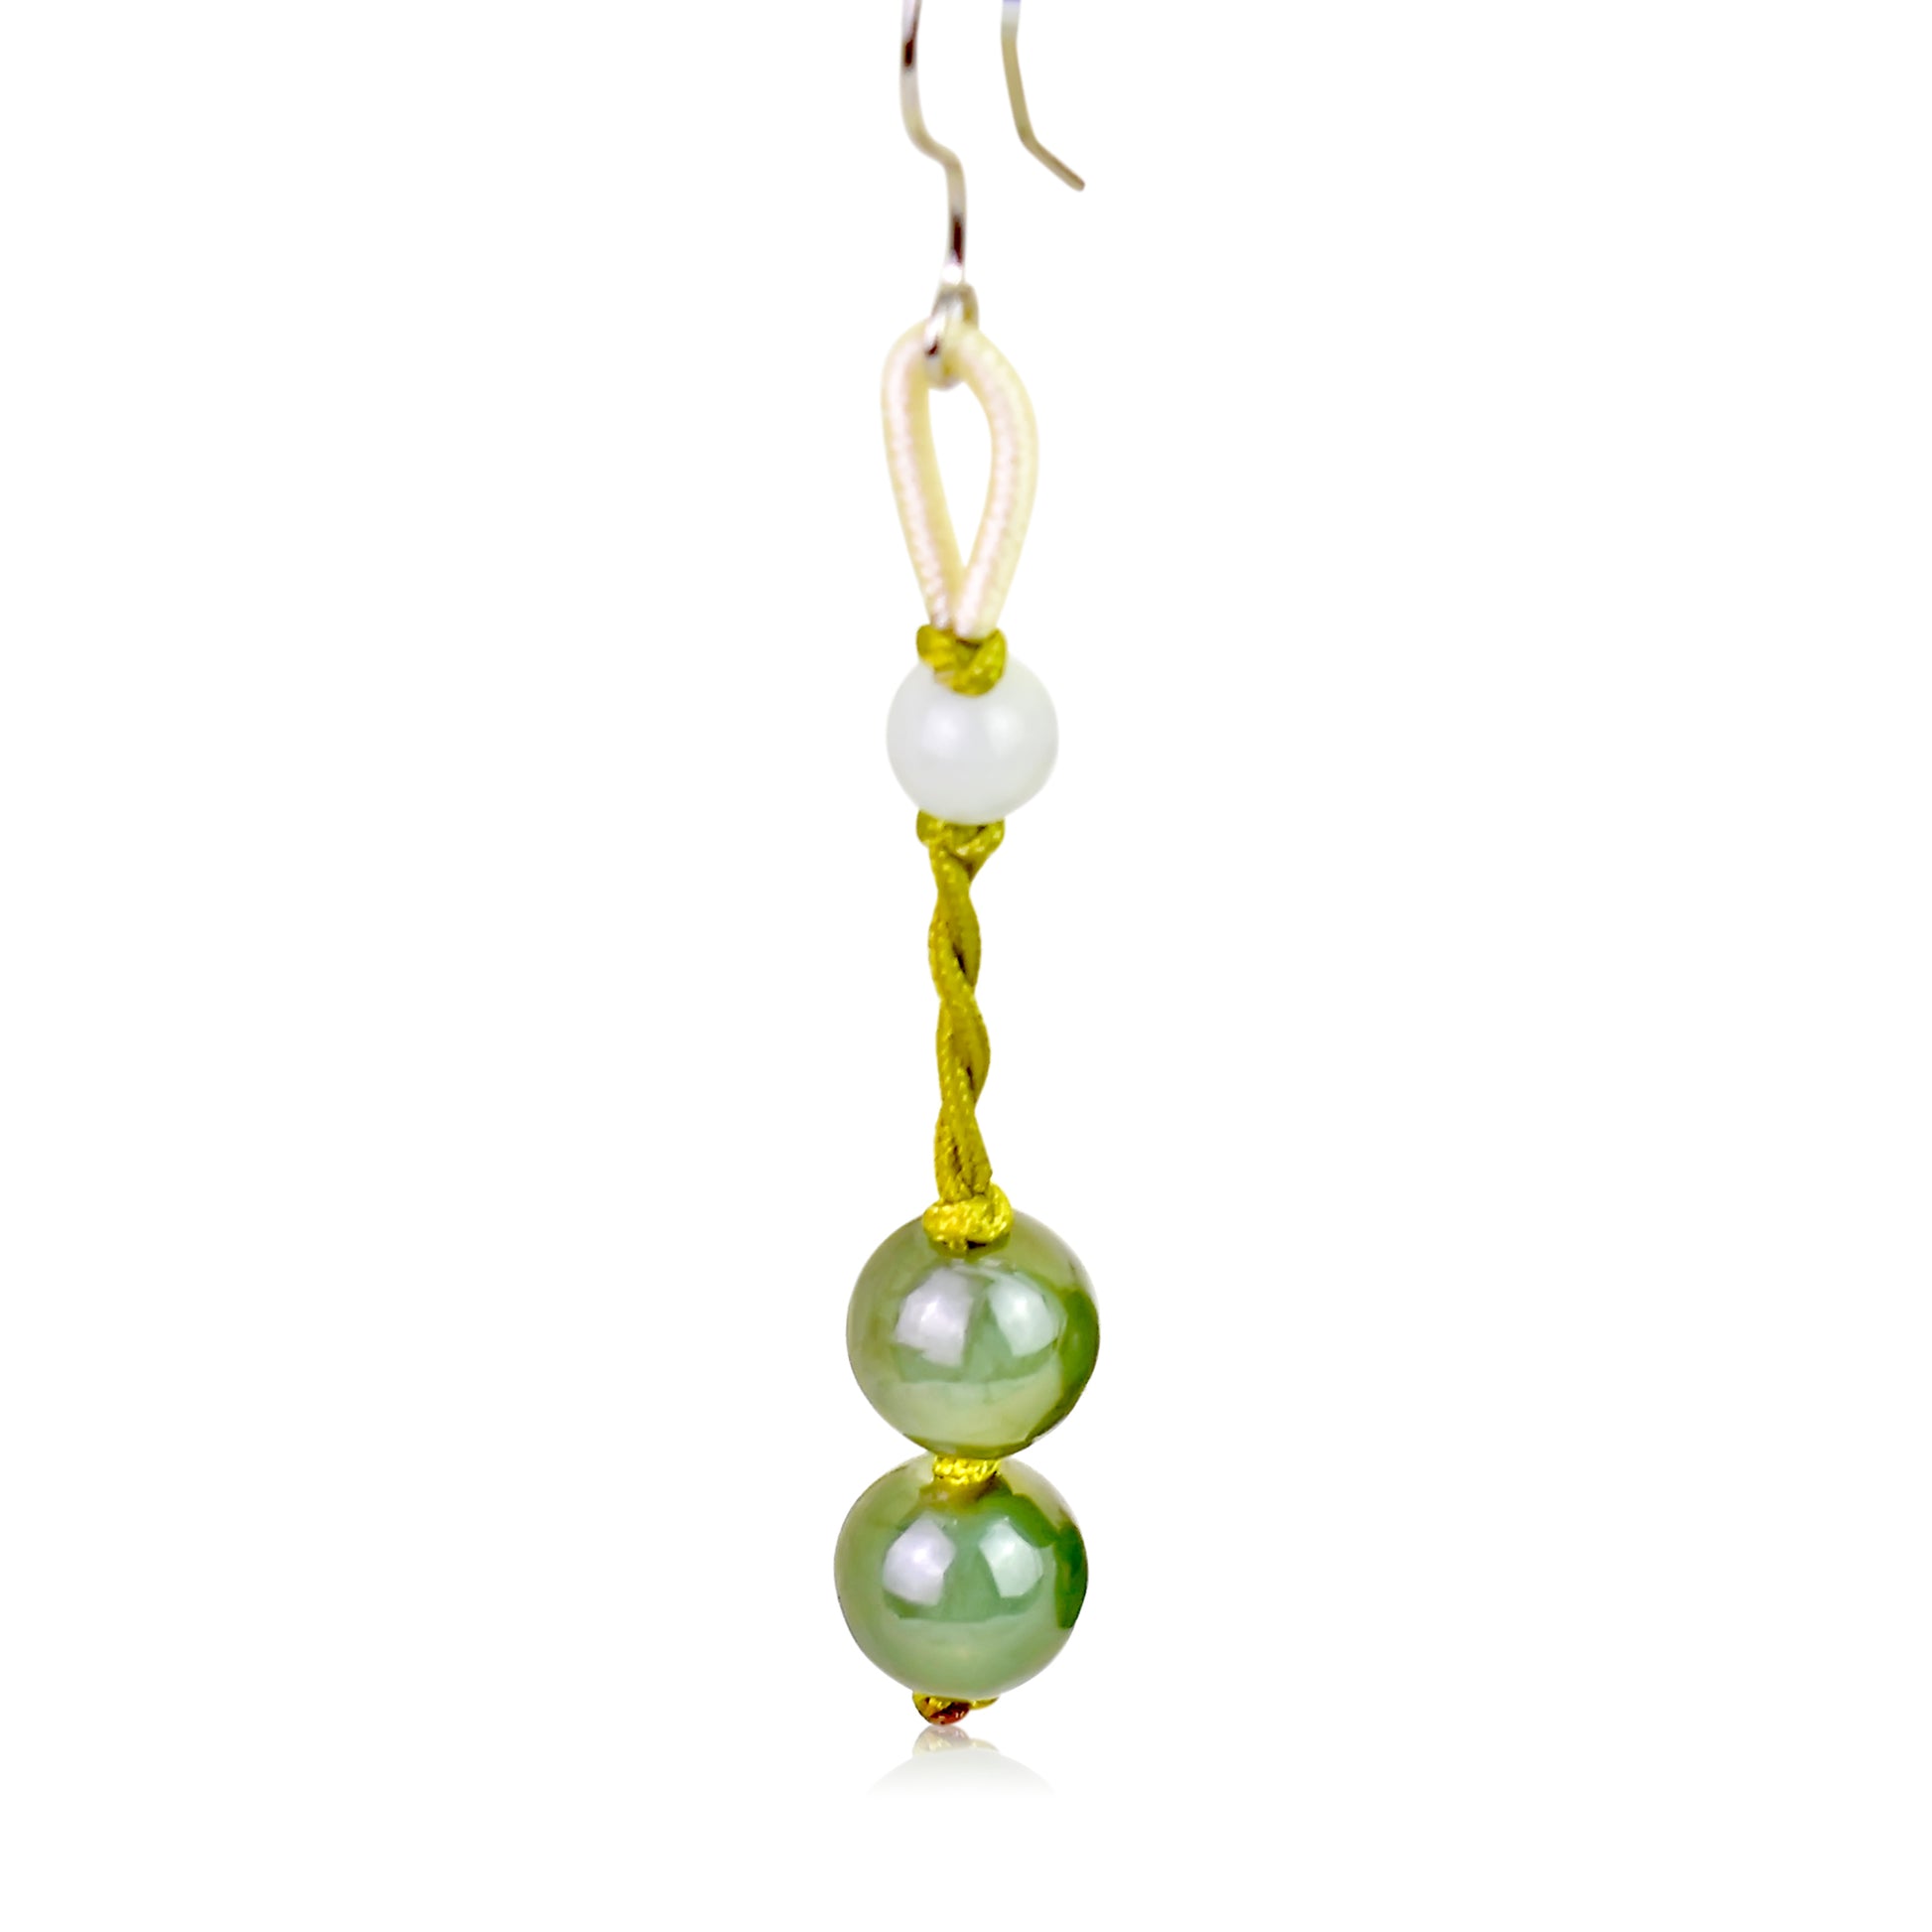 Stand Out in Style with Sleek Mod-Style Jade Beads Earrings made with Lime Cord